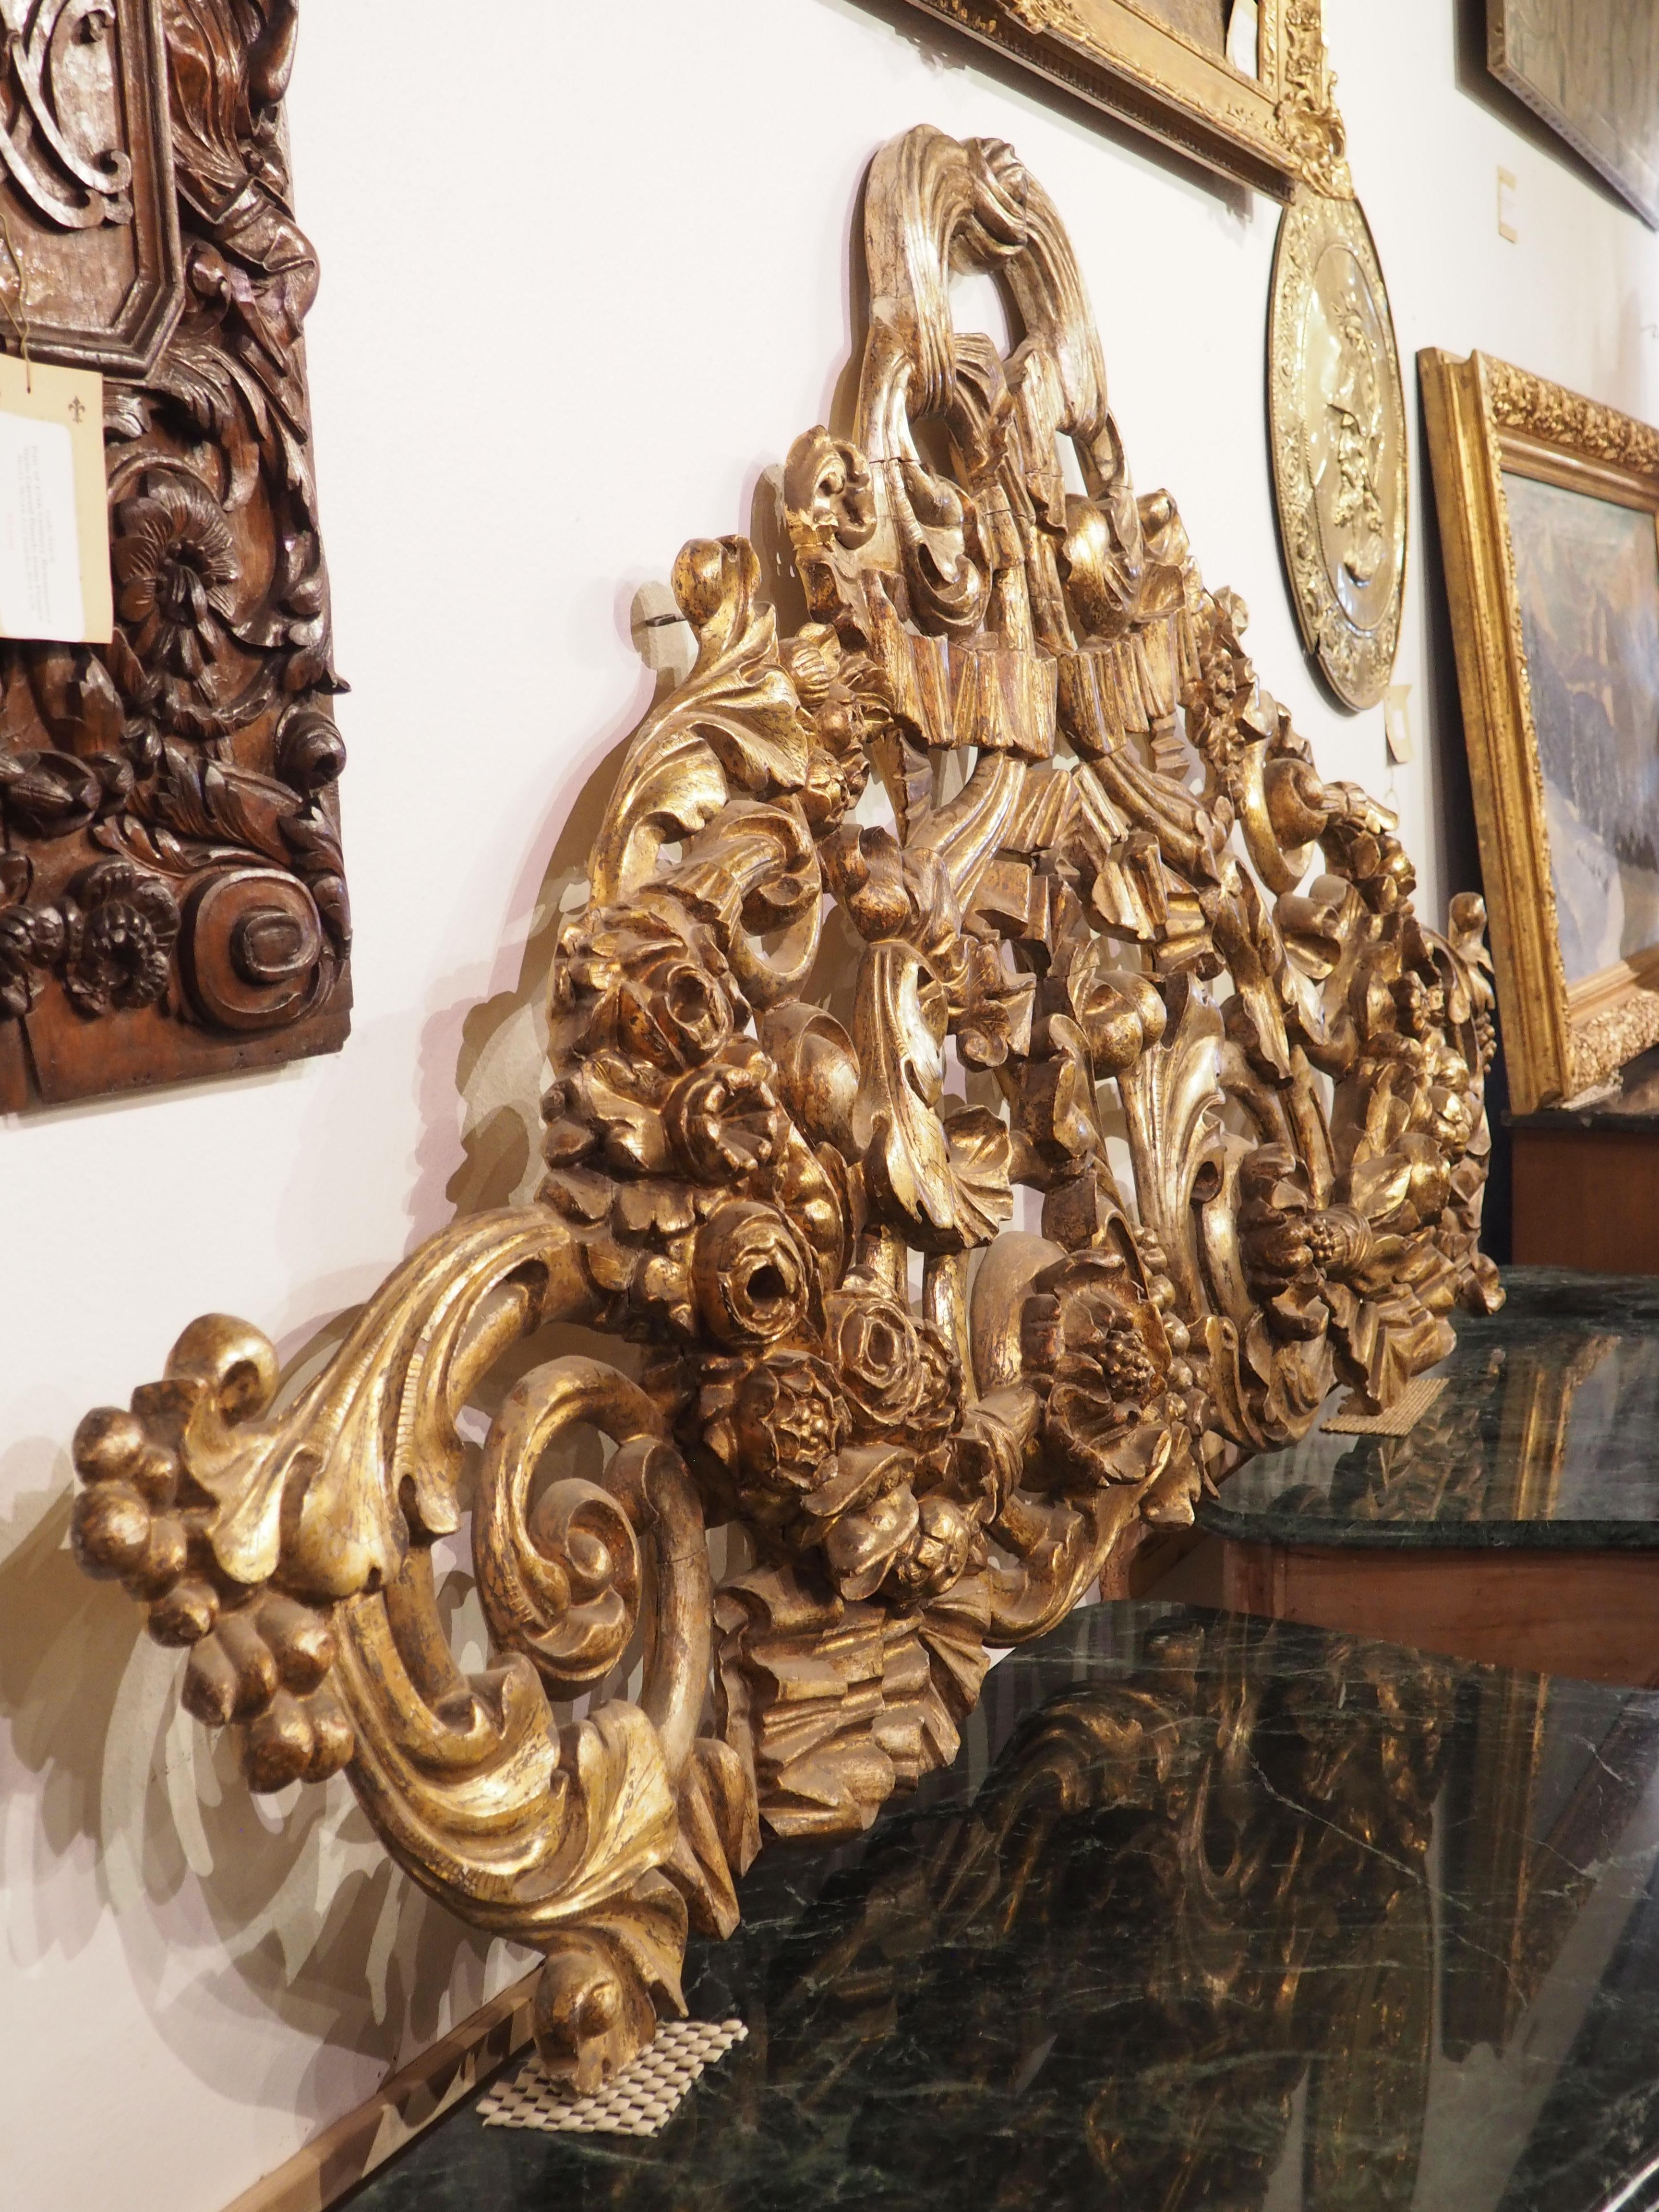 Large Circa 1850 Italian Giltwood Architectural Carving or Headboard 91.5 Inches For Sale 4